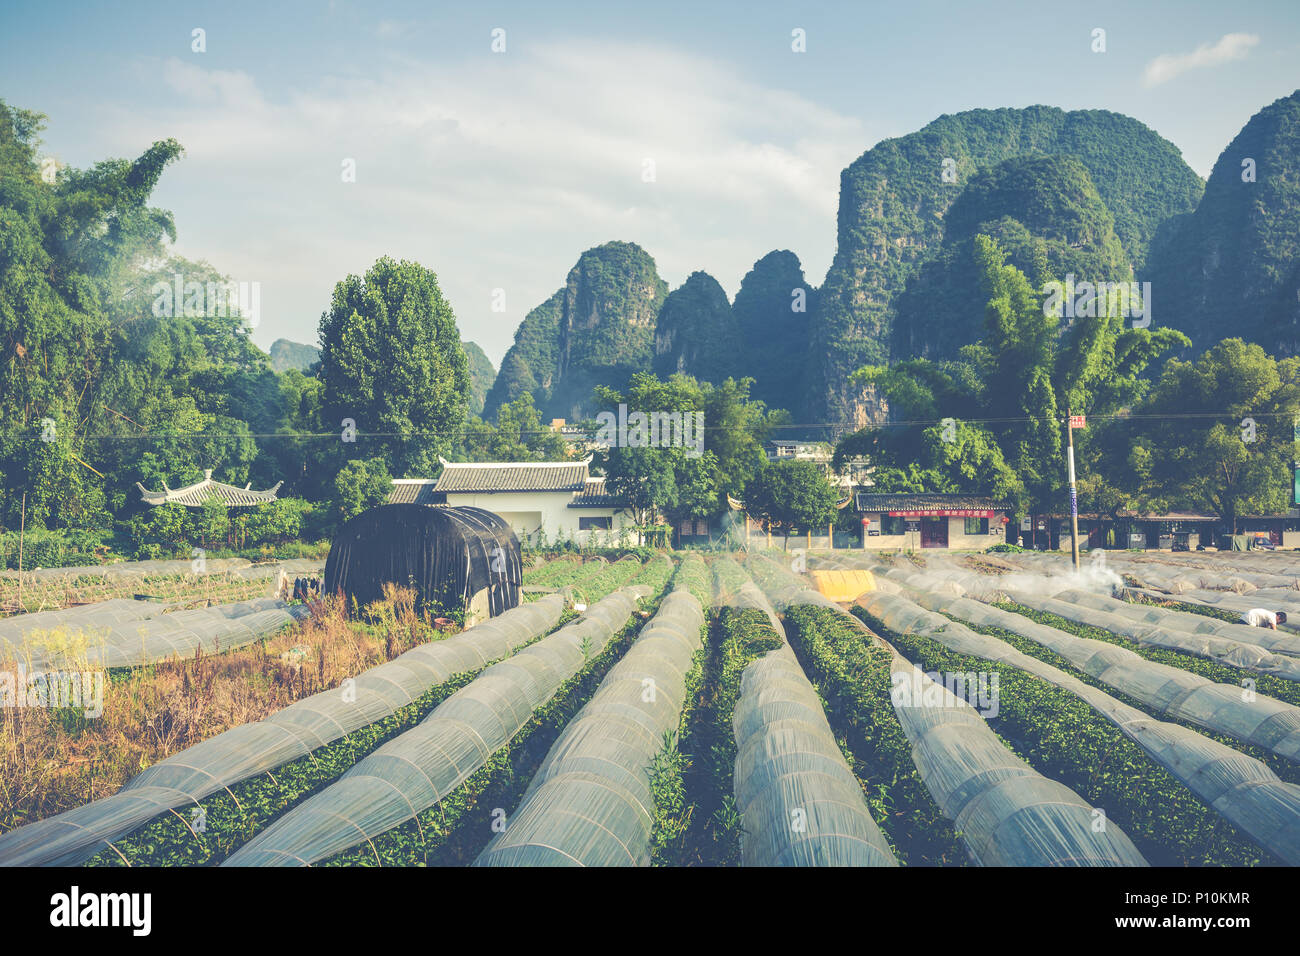 Scenic summer sunny landscape at Yangshuo County of Guilin, China. Stock Photo